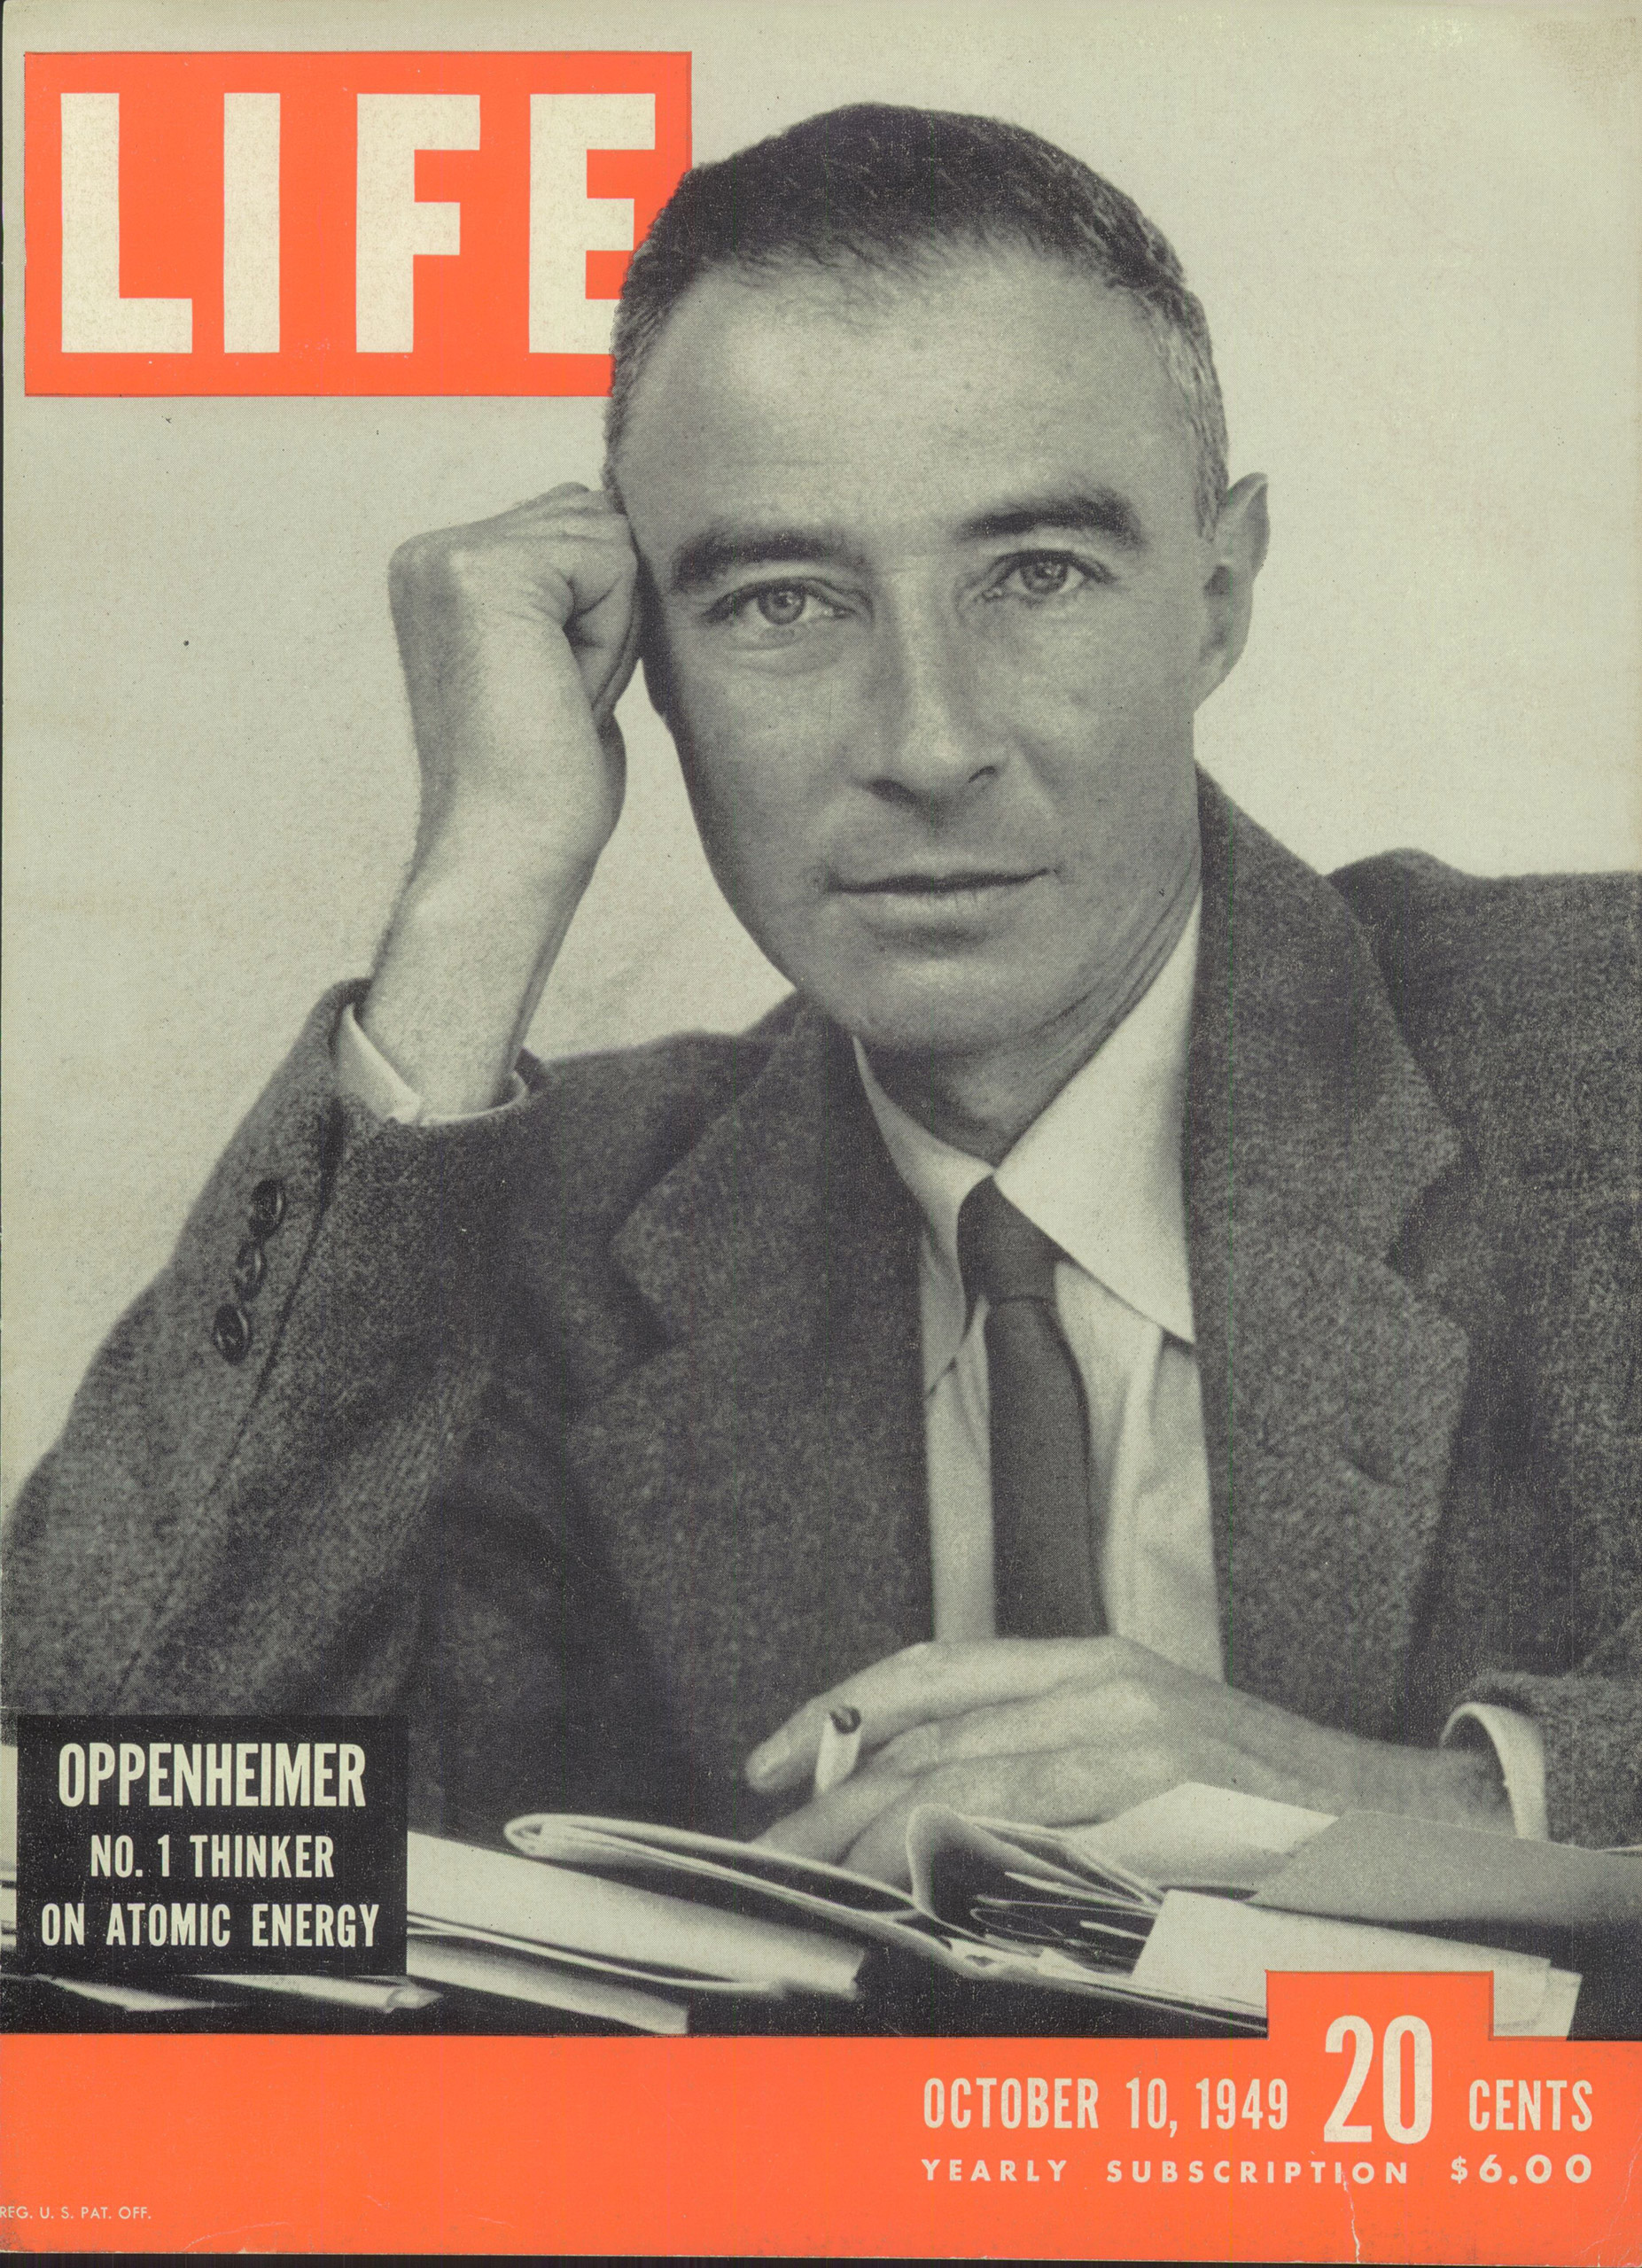 Oct. 10, 1949 cover of LIFE magazine.